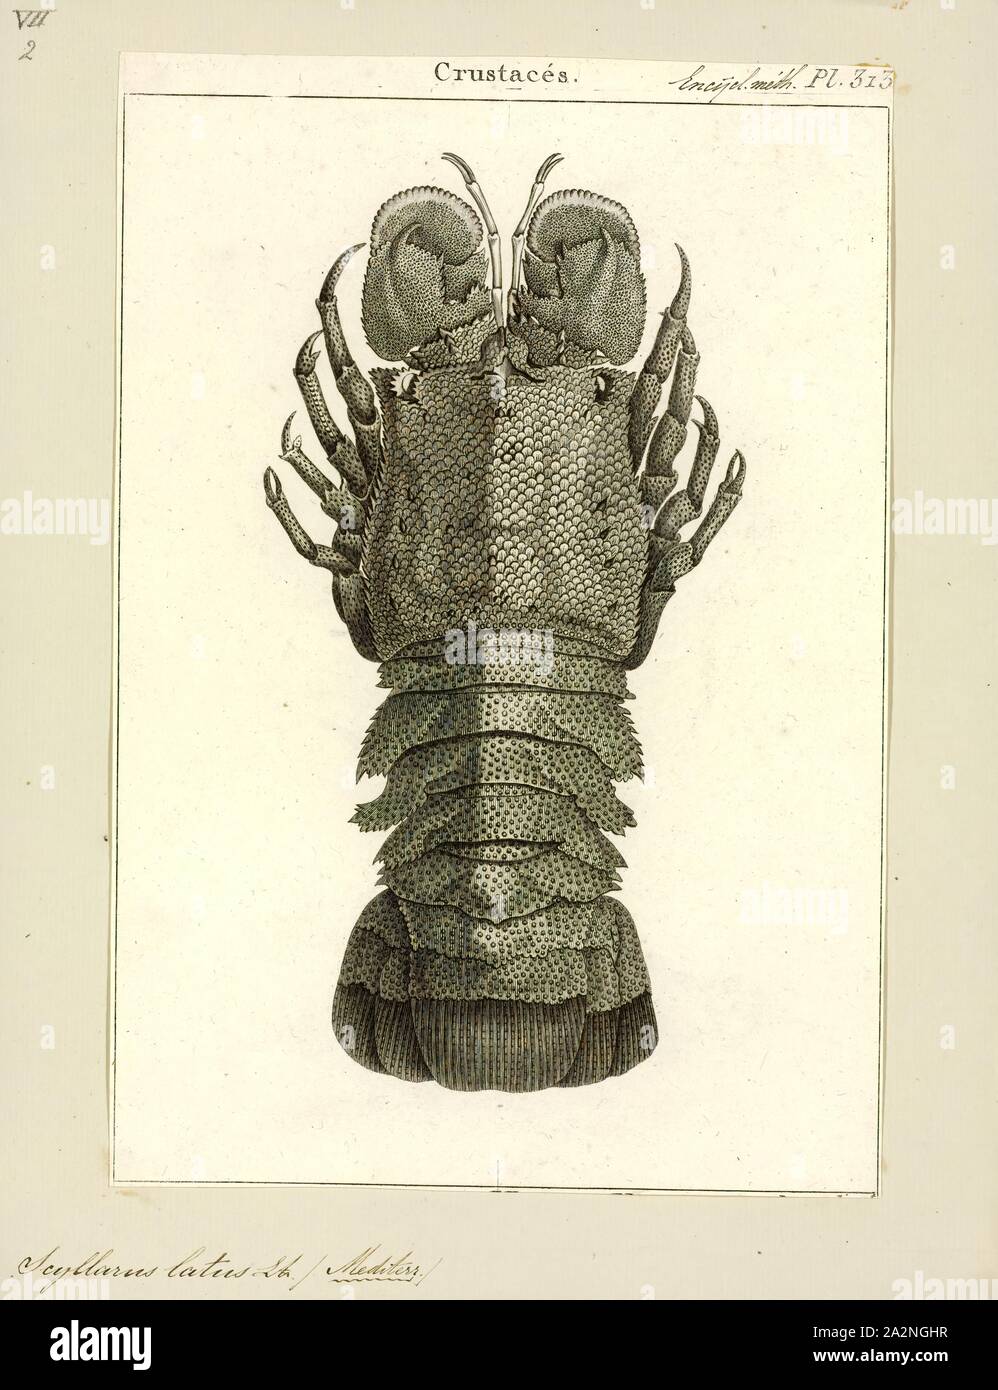 Scyllarus latus, Print, Scyllarides latus, the Mediterranean slipper lobster, is a species of slipper lobster found in the Mediterranean Sea and in the eastern Atlantic Ocean. It is edible and highly regarded as food, but is now rare over much of its range due to overfishing. Adults may grow to 1 foot (30 cm) long, are camouflaged, and have no claws. They are nocturnal, emerging from caves and other shelters during the night to feed on molluscs. As well as being eaten by humans, S. latus is also preyed upon by a variety of bony fish. Its closest relative is S. herklotsii, which occurs off the Stock Photo